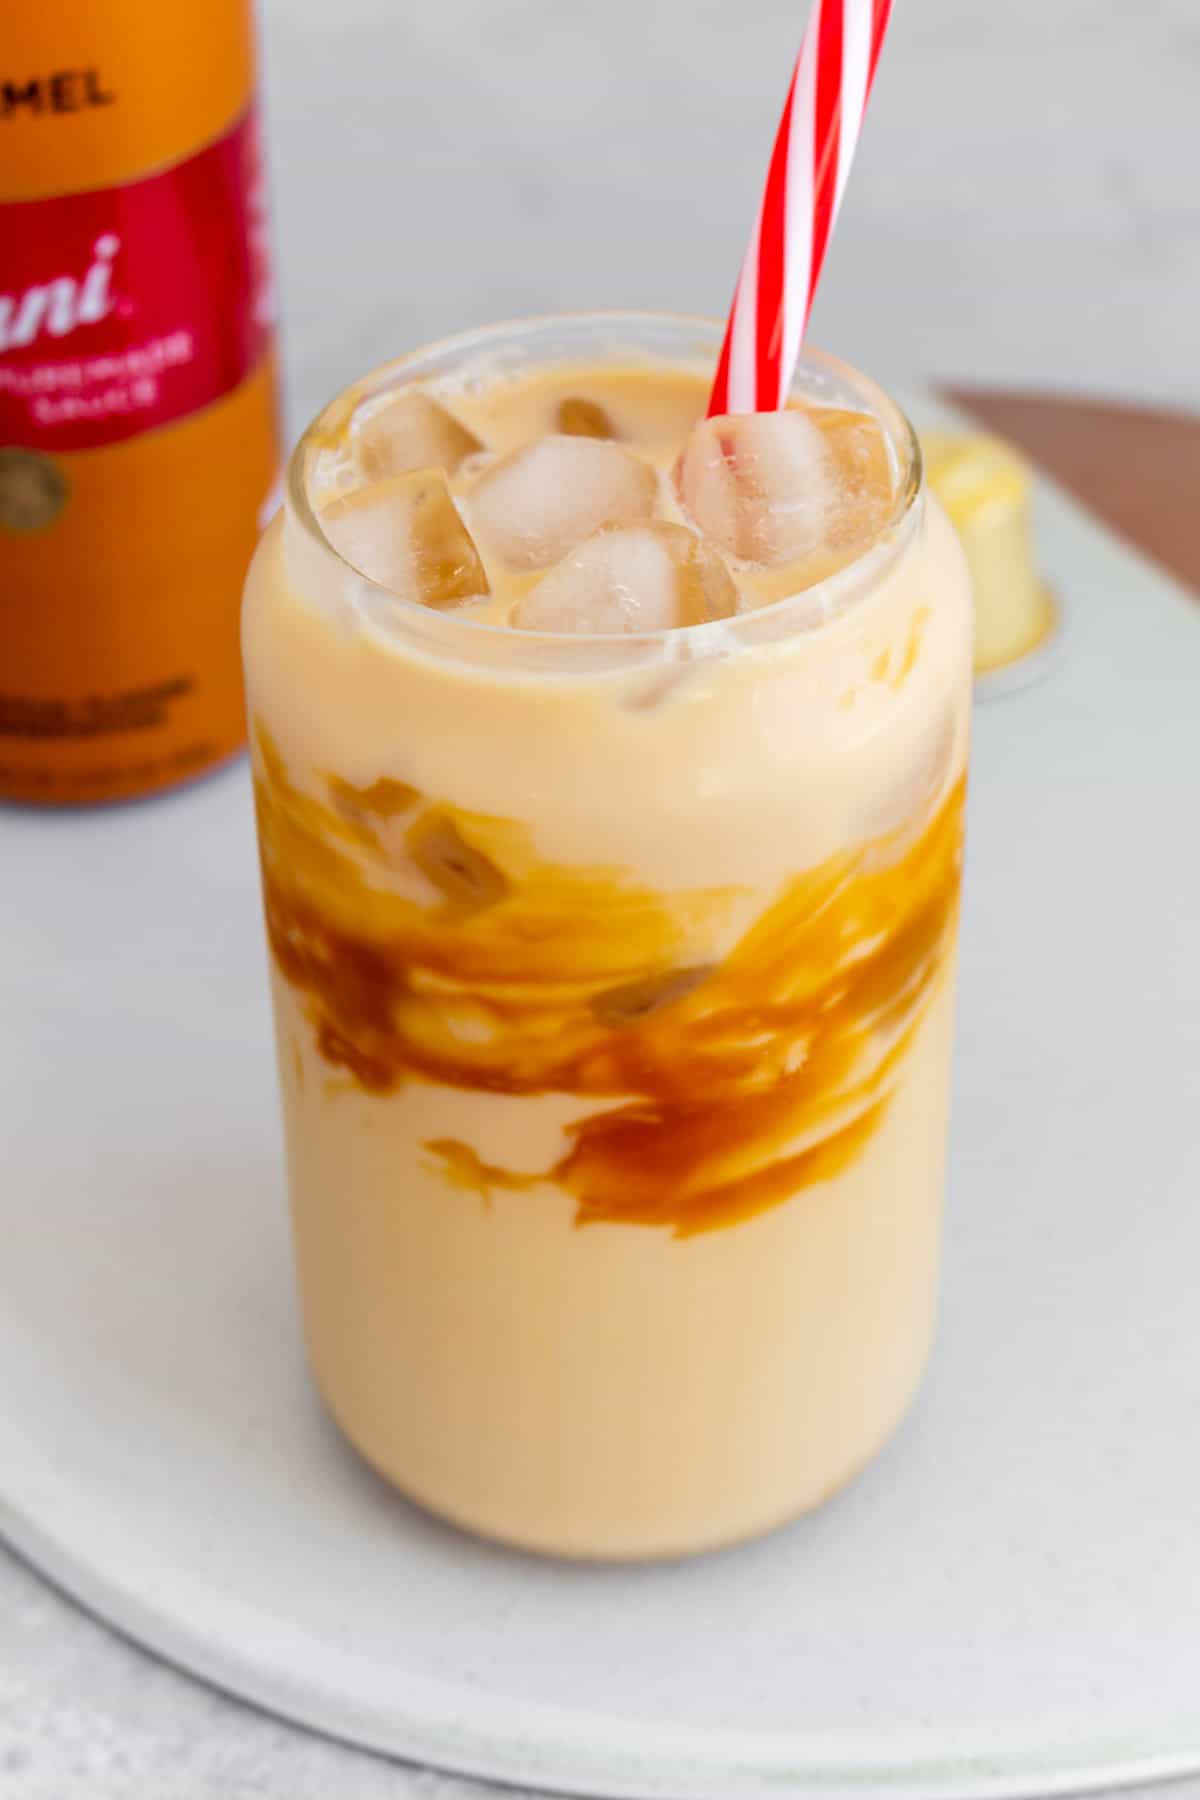 An angled view of a glass of caramel macchiato with a striped straw.